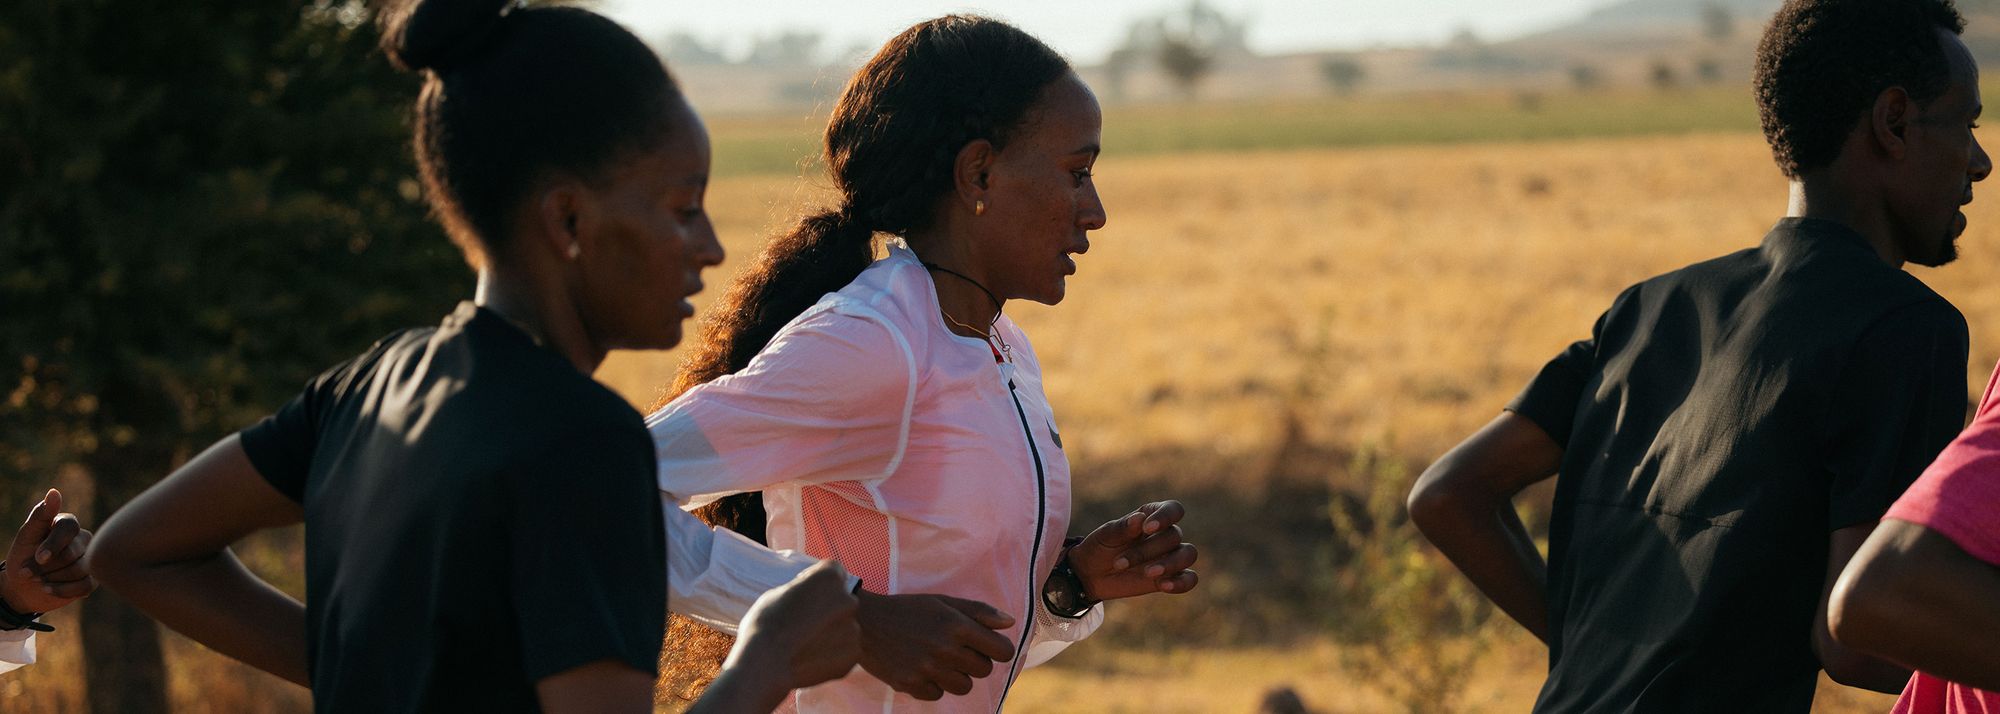 The 2022 world marathon champion allows World Athletics Inside Track an exclusive look at her training, opens the doors to her home and provides insight into Ethiopian running culture